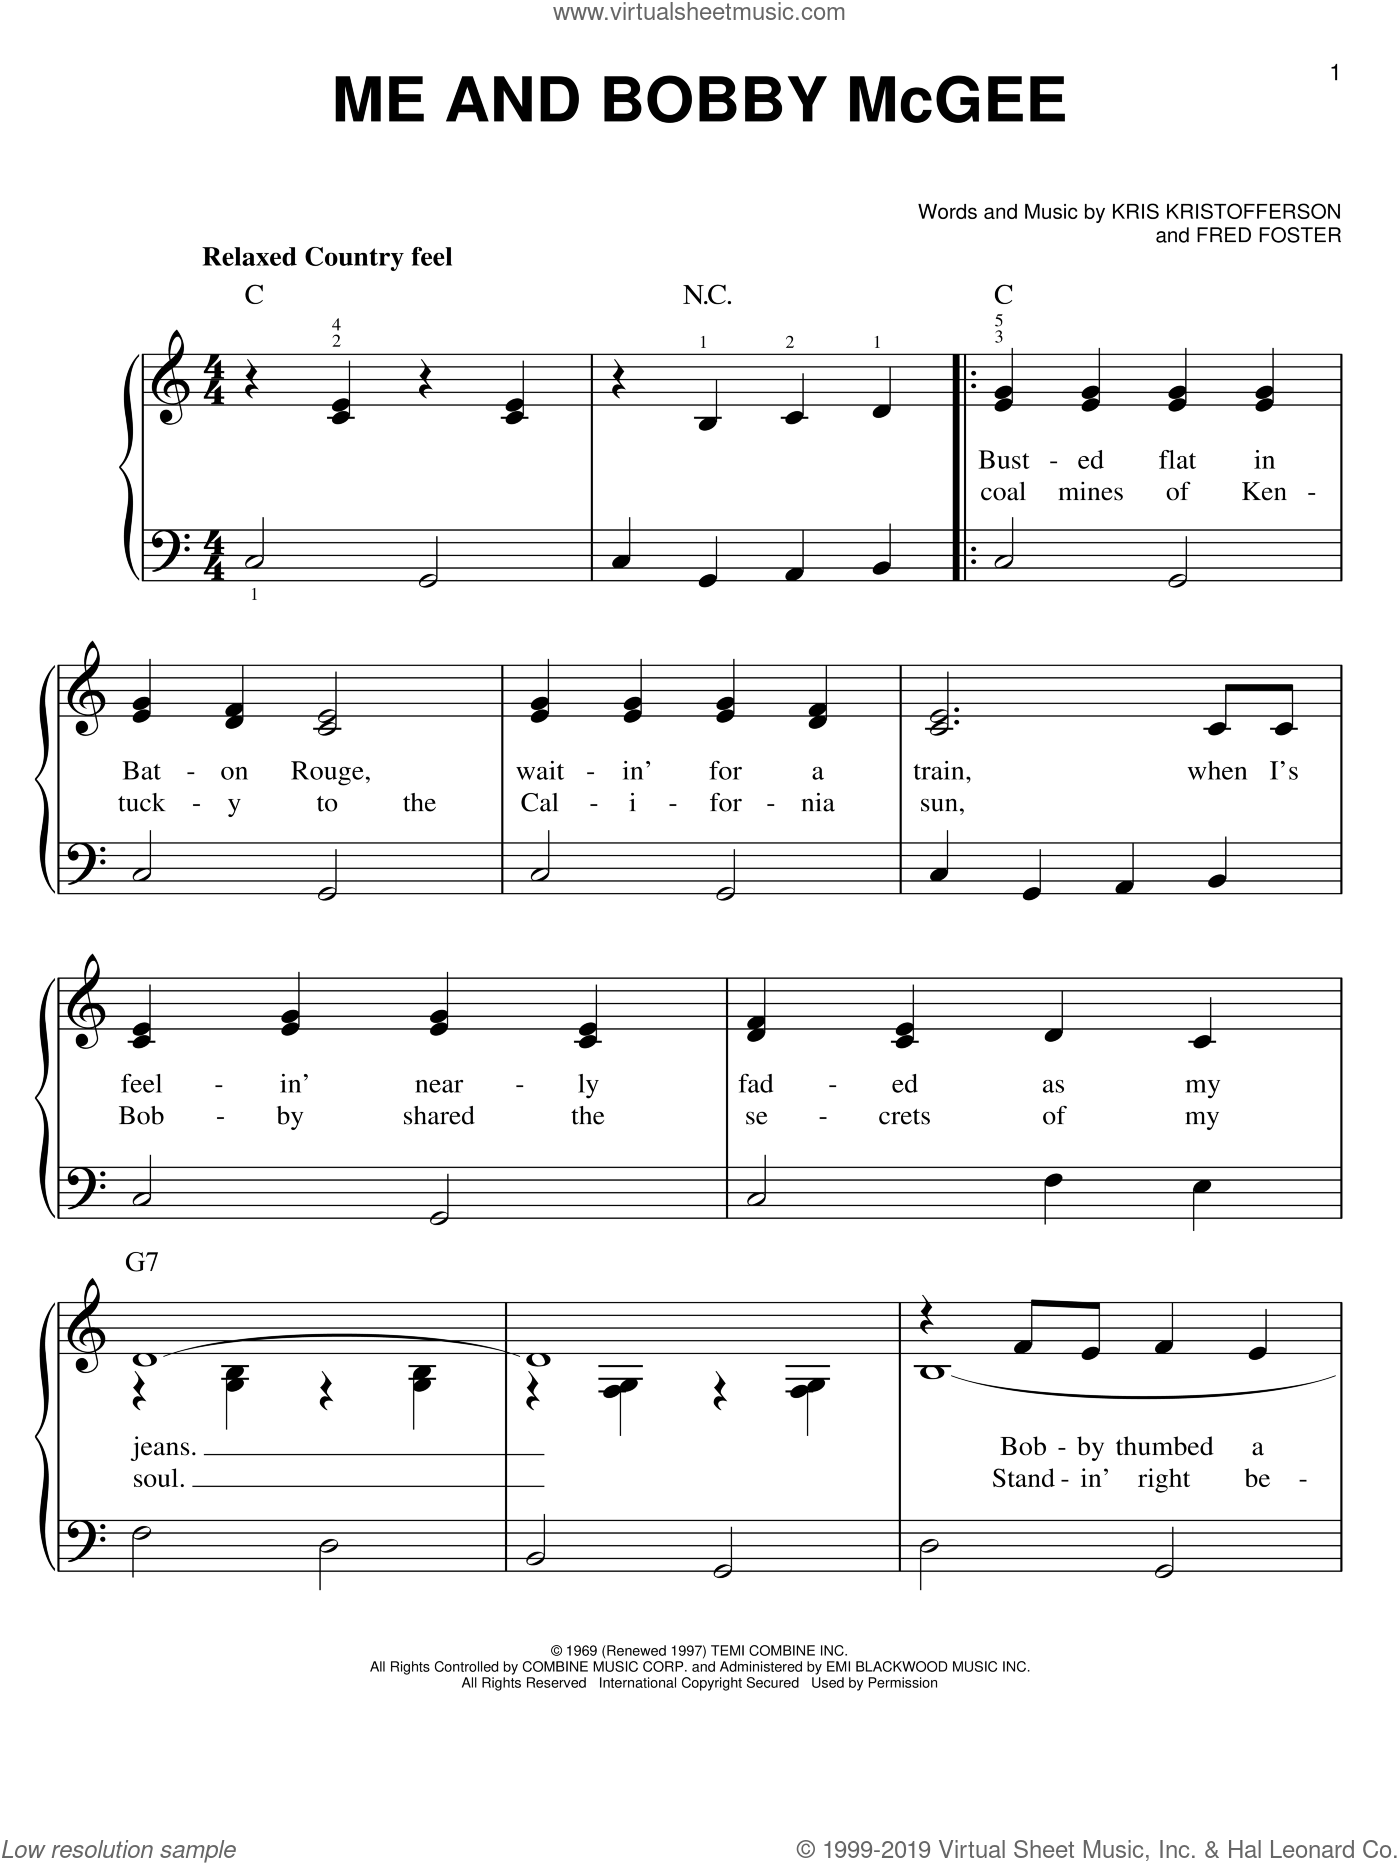 Joplin - Me And Bobby McGee sheet music for piano solo [PDF]